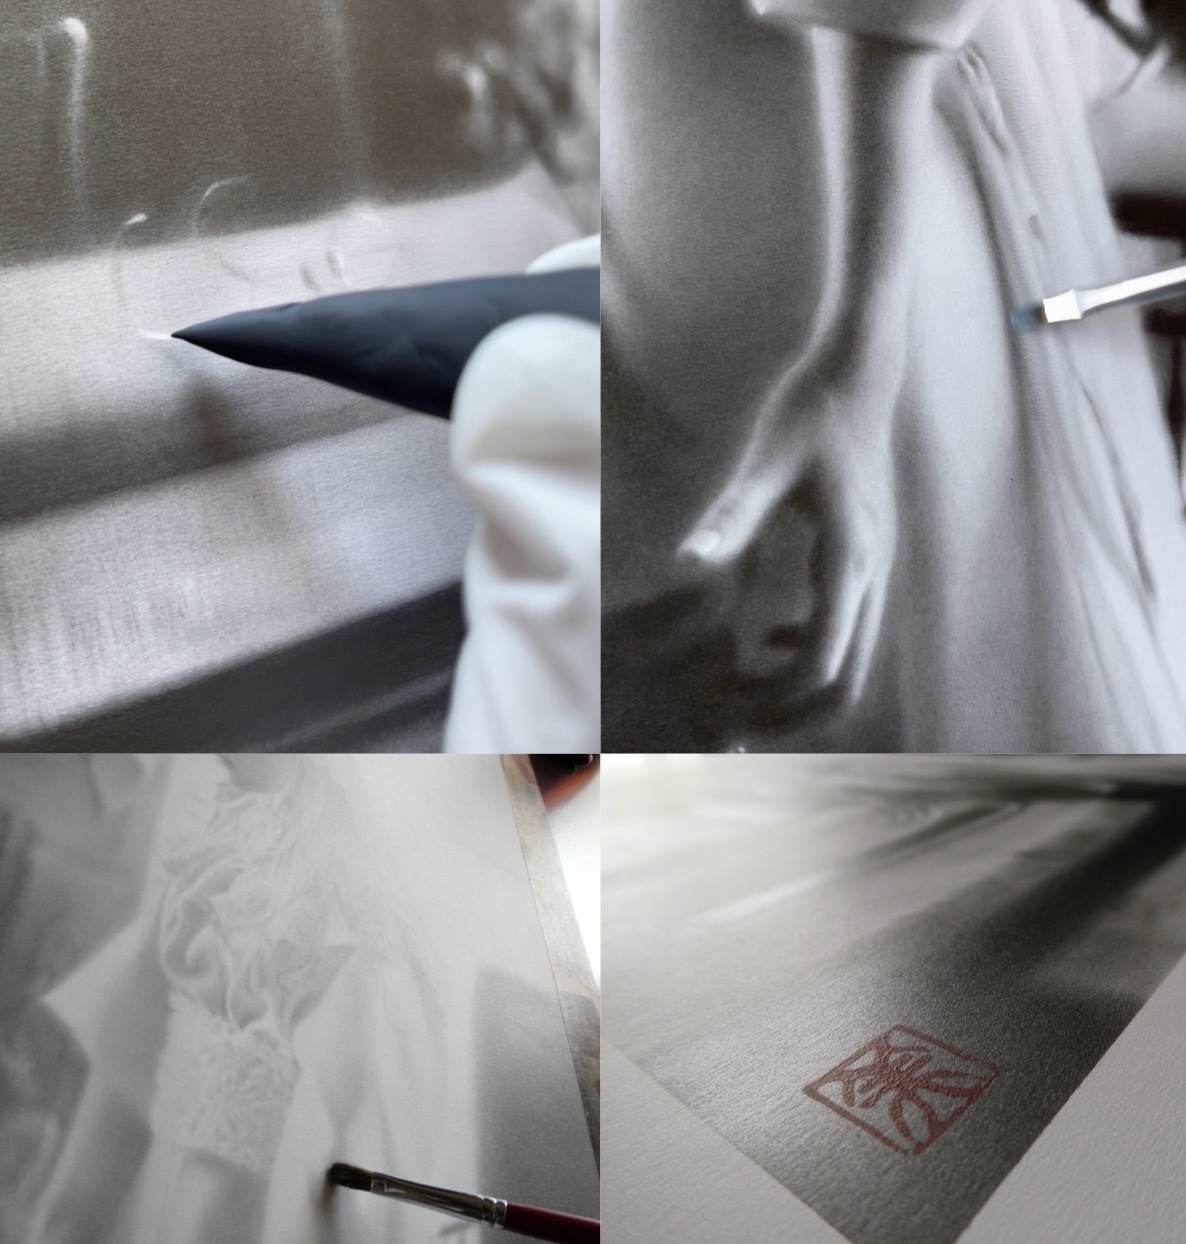 Graphite Drawings > “A Story Without Words" process shots